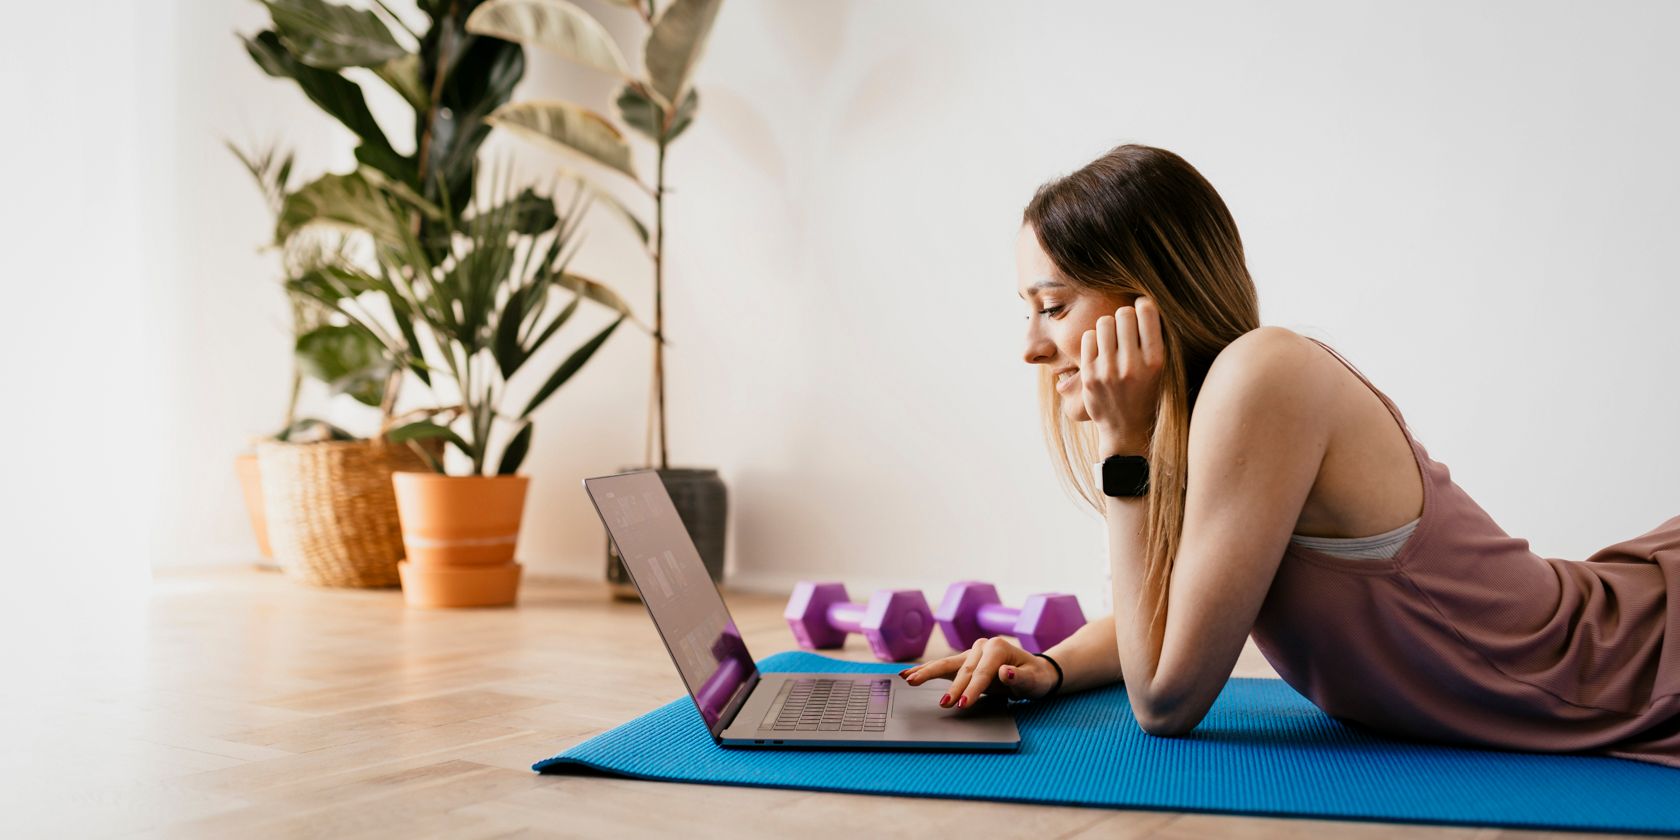 A woman lying on an exercise mat with weights choosing a workout on a laptop